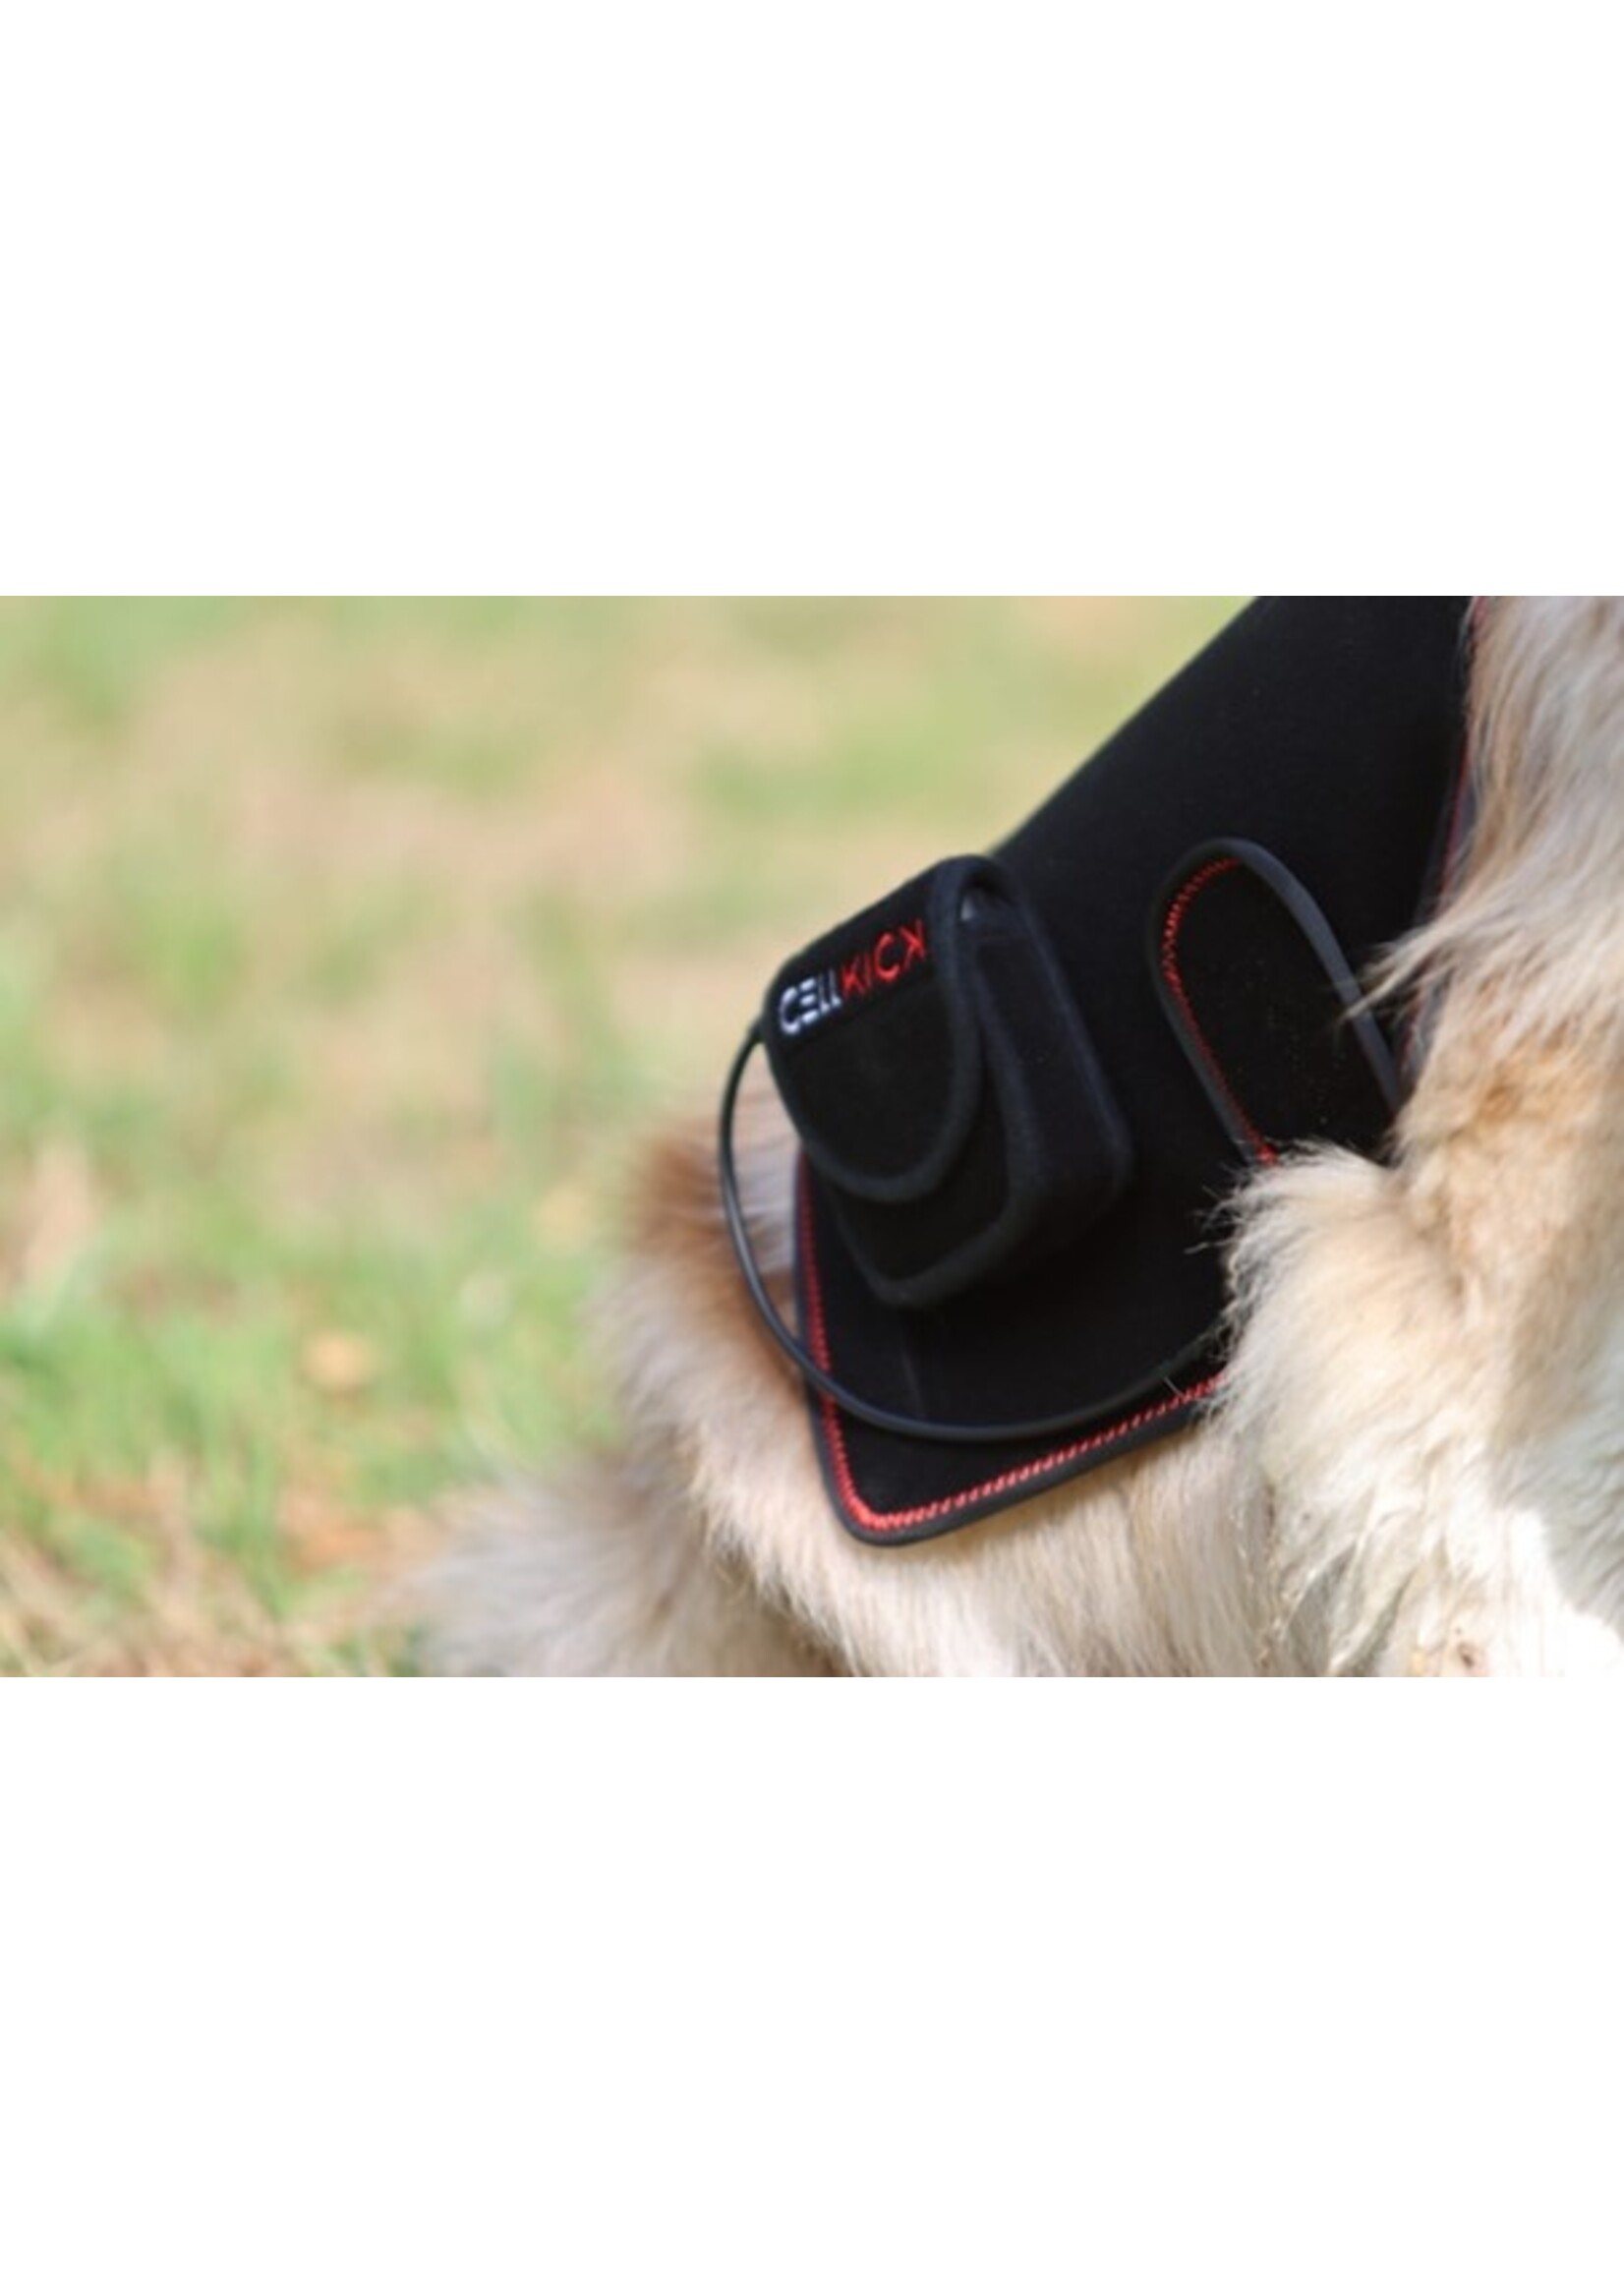 CellKick Dog Pad & Low Level Laser - Red Light Therapy - Combi